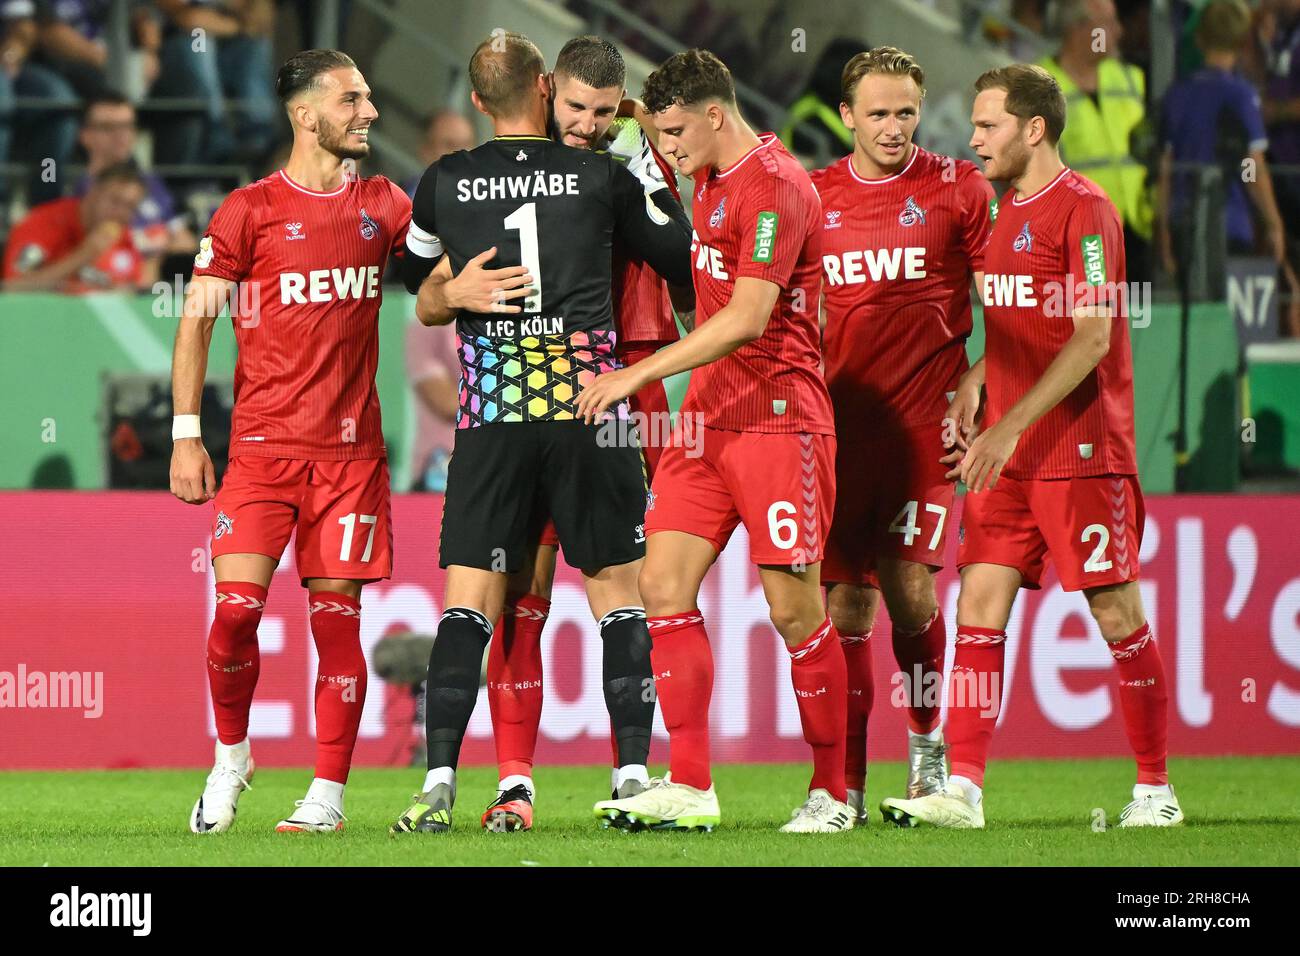 Osnabruck. 14th Aug, 2023. Julian Chabot (3rd L) of FC Koln celebrates scoring during the German Cup 1st round match between FC Koln and VfL Osnabruck in Osnabruck, Germany on Aug. 14, 2023. Credit: Ulrich Hufnagel/Xinhua/Alamy Live News Stock Photo